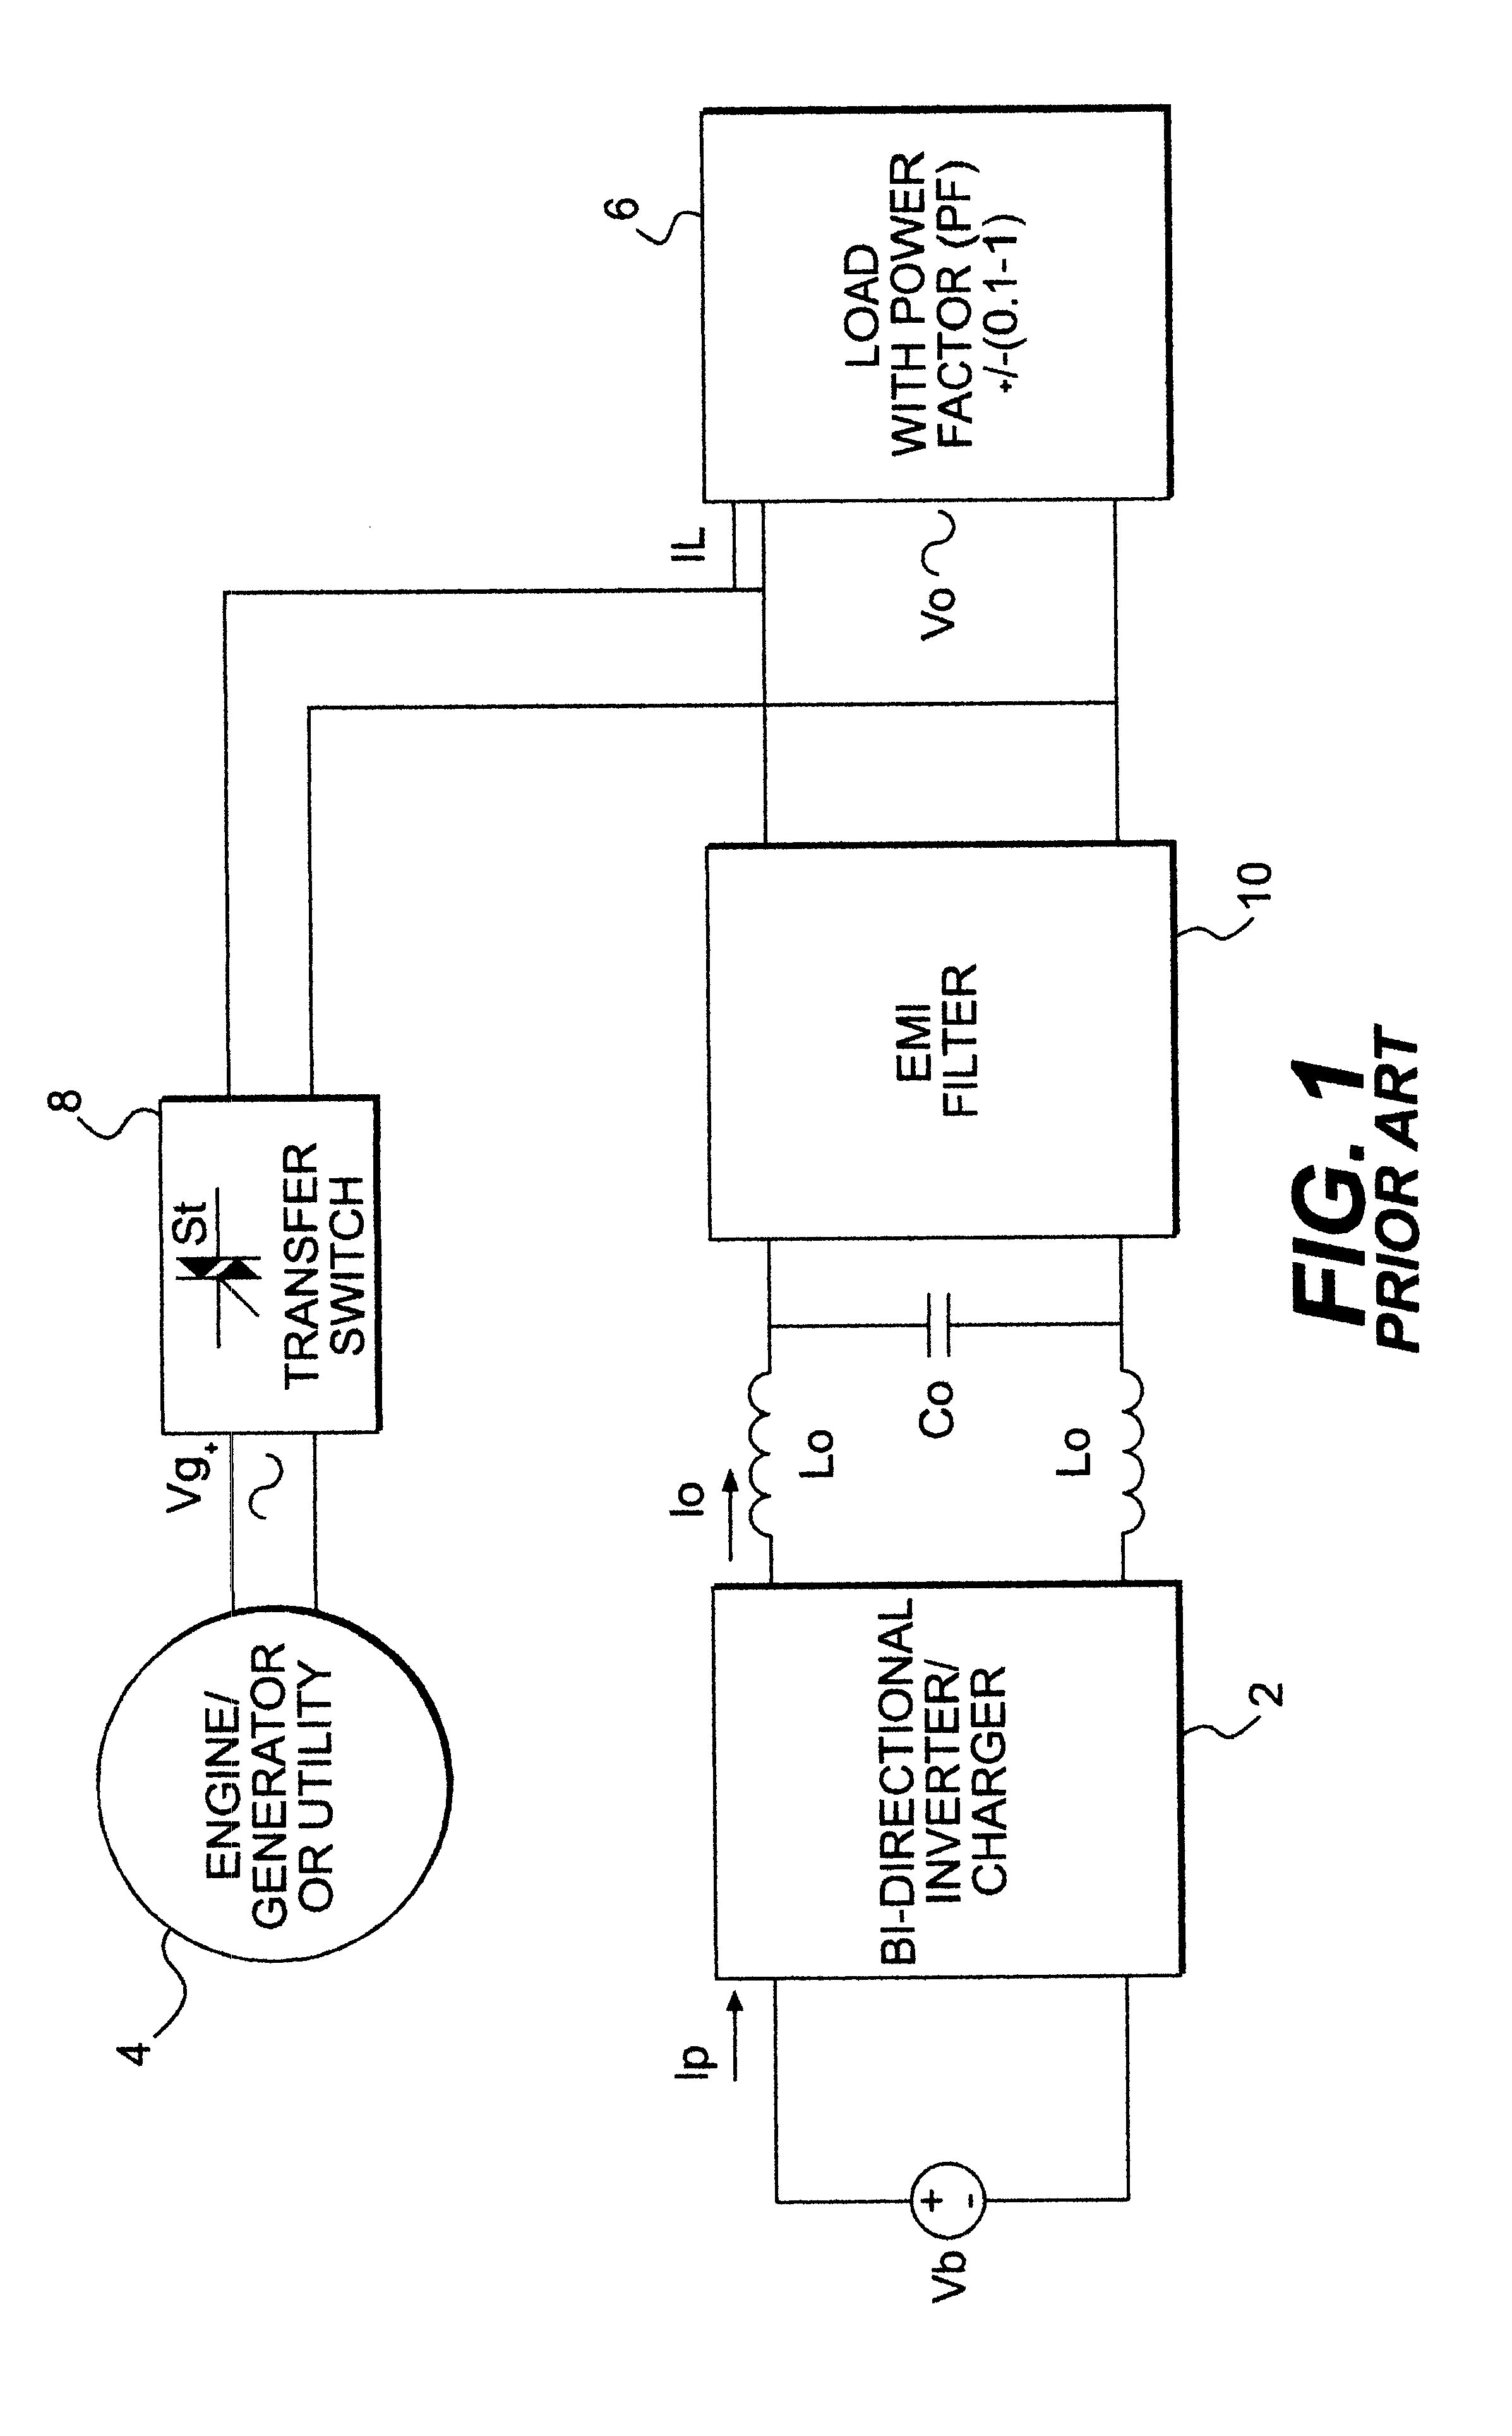 Soft-switched quasi-single-stage (QSS) bi-directional inverter/charger